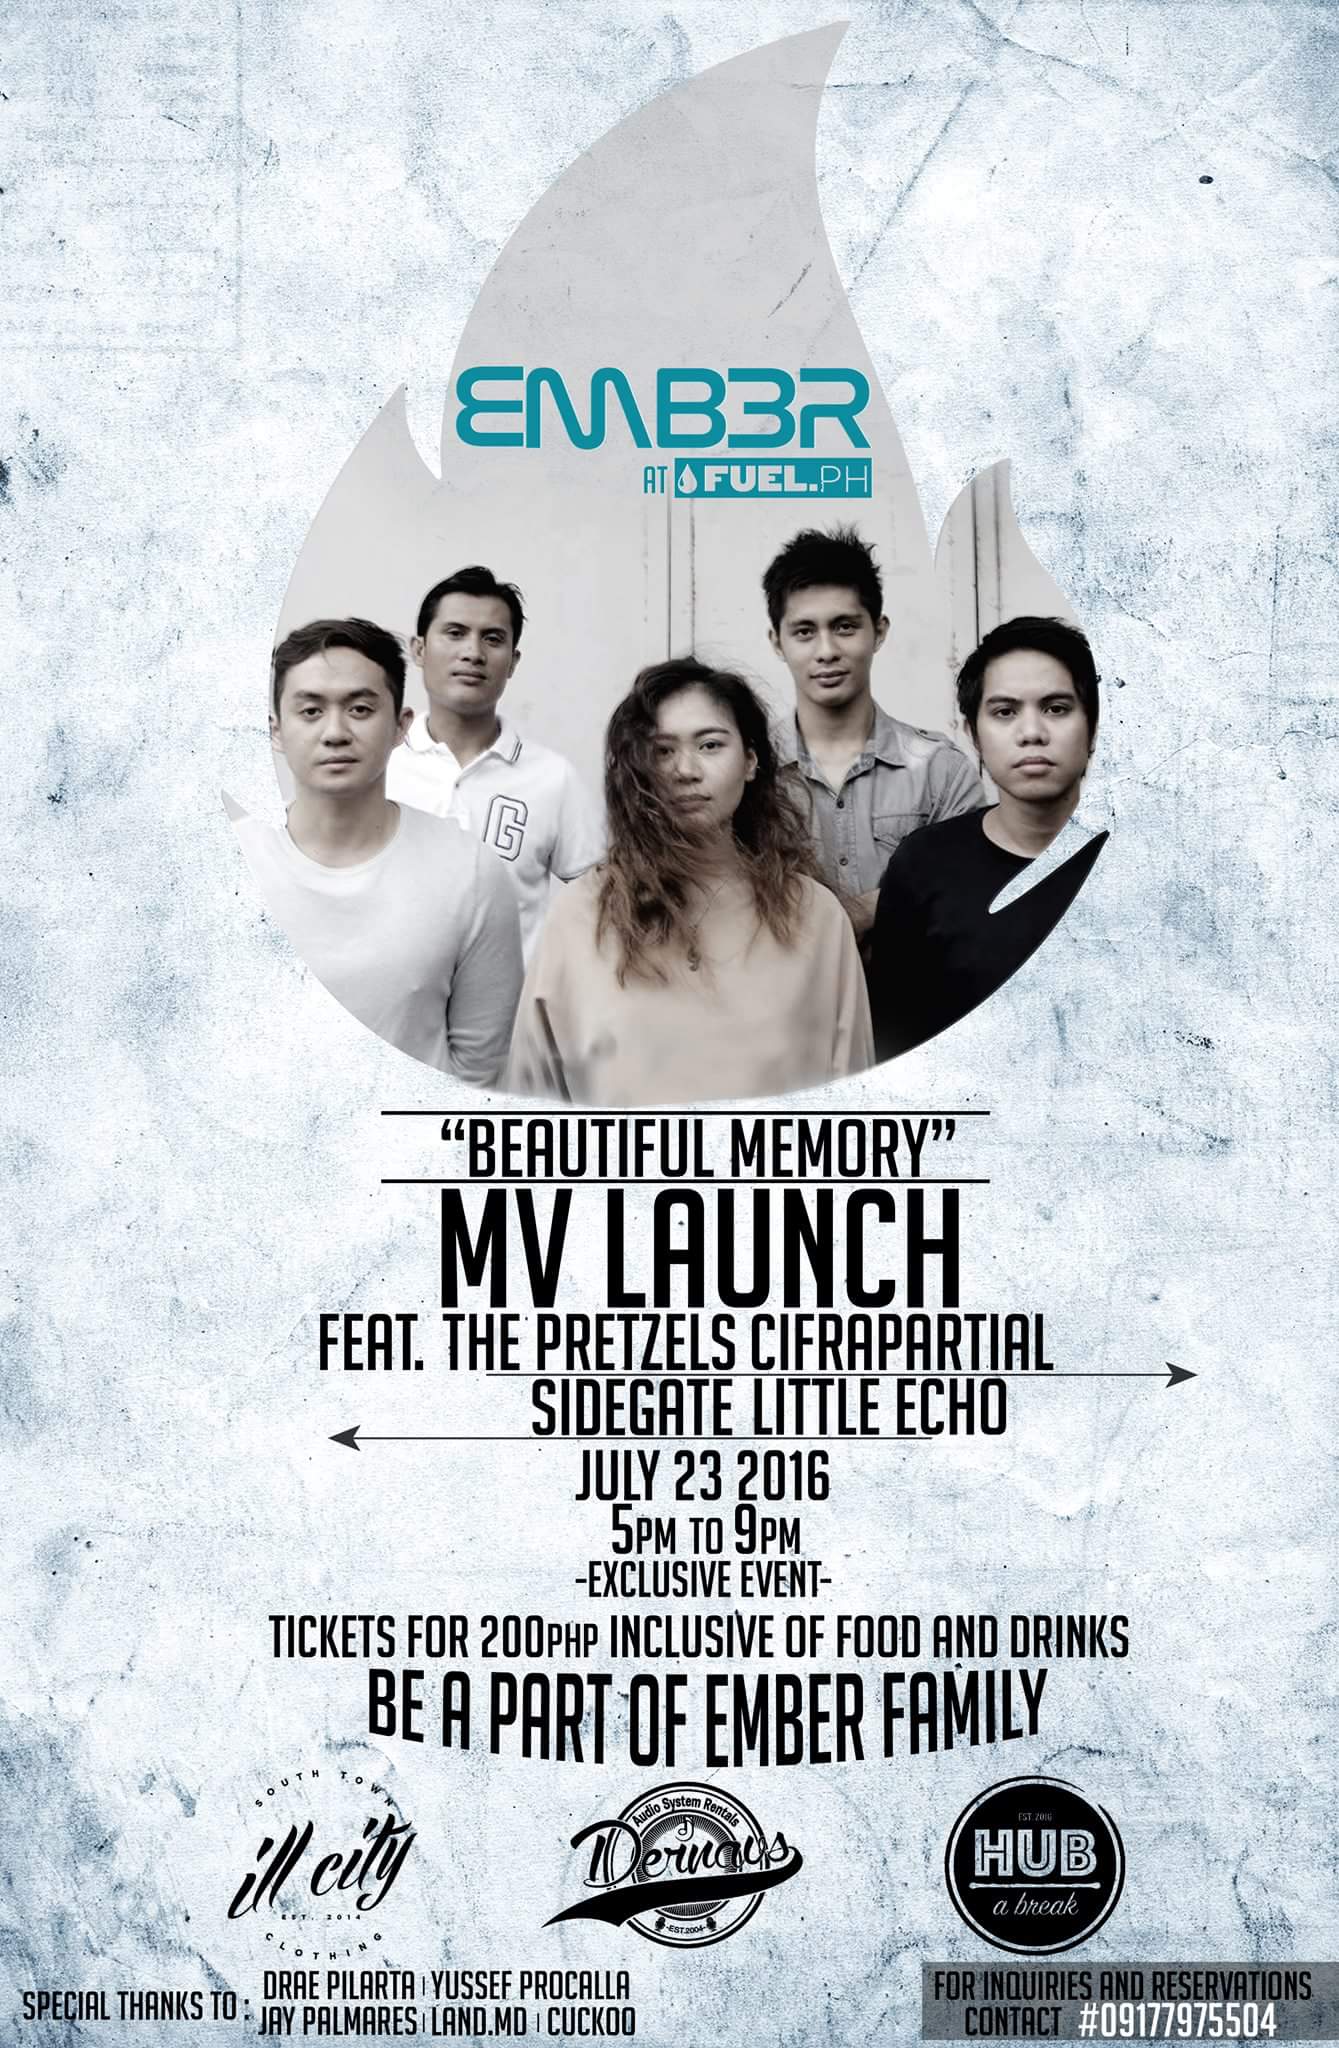 Beautiful Memory Music Video Launch Hosted by Ember July 23 2016, Saturday at 5 PM - 9 PM 3 days from now · 77–86° Heavy Thunderstorm pin Show Map Fuel.ph Benigno Aquino Ave Service Rd, 5000 Iloilo City, Philippines Be with us as we launch the music video for our original track "Beautiful Memory" on July 23rd, 2016. Come and be a part of #emberph family. -glad you found us Side Gate Like This Page · 12 hrs · Edited · (It's a beautiful memory! Woooohoooo!) Guess who's launching their Music Video on the 23rd of this month, Saturday from 5pm to 9pm @ Fuel.ph!? Got that right! Side Gate's sister band EMBER will be launching their "Beautiful Memory" Music Video. BE PART OF THE EMBER FAMILY! (This is an exclusive event so get your tickets now!) 😎 Side Gate will also be playing and is on 100% support for EMBER together with Little Echo, Cifrapartial and The Pretzels. ☺️ #EmberMVlaunch #Emberph #BeautifulMemory #KwentongSideGate - SIDE GATE 😎